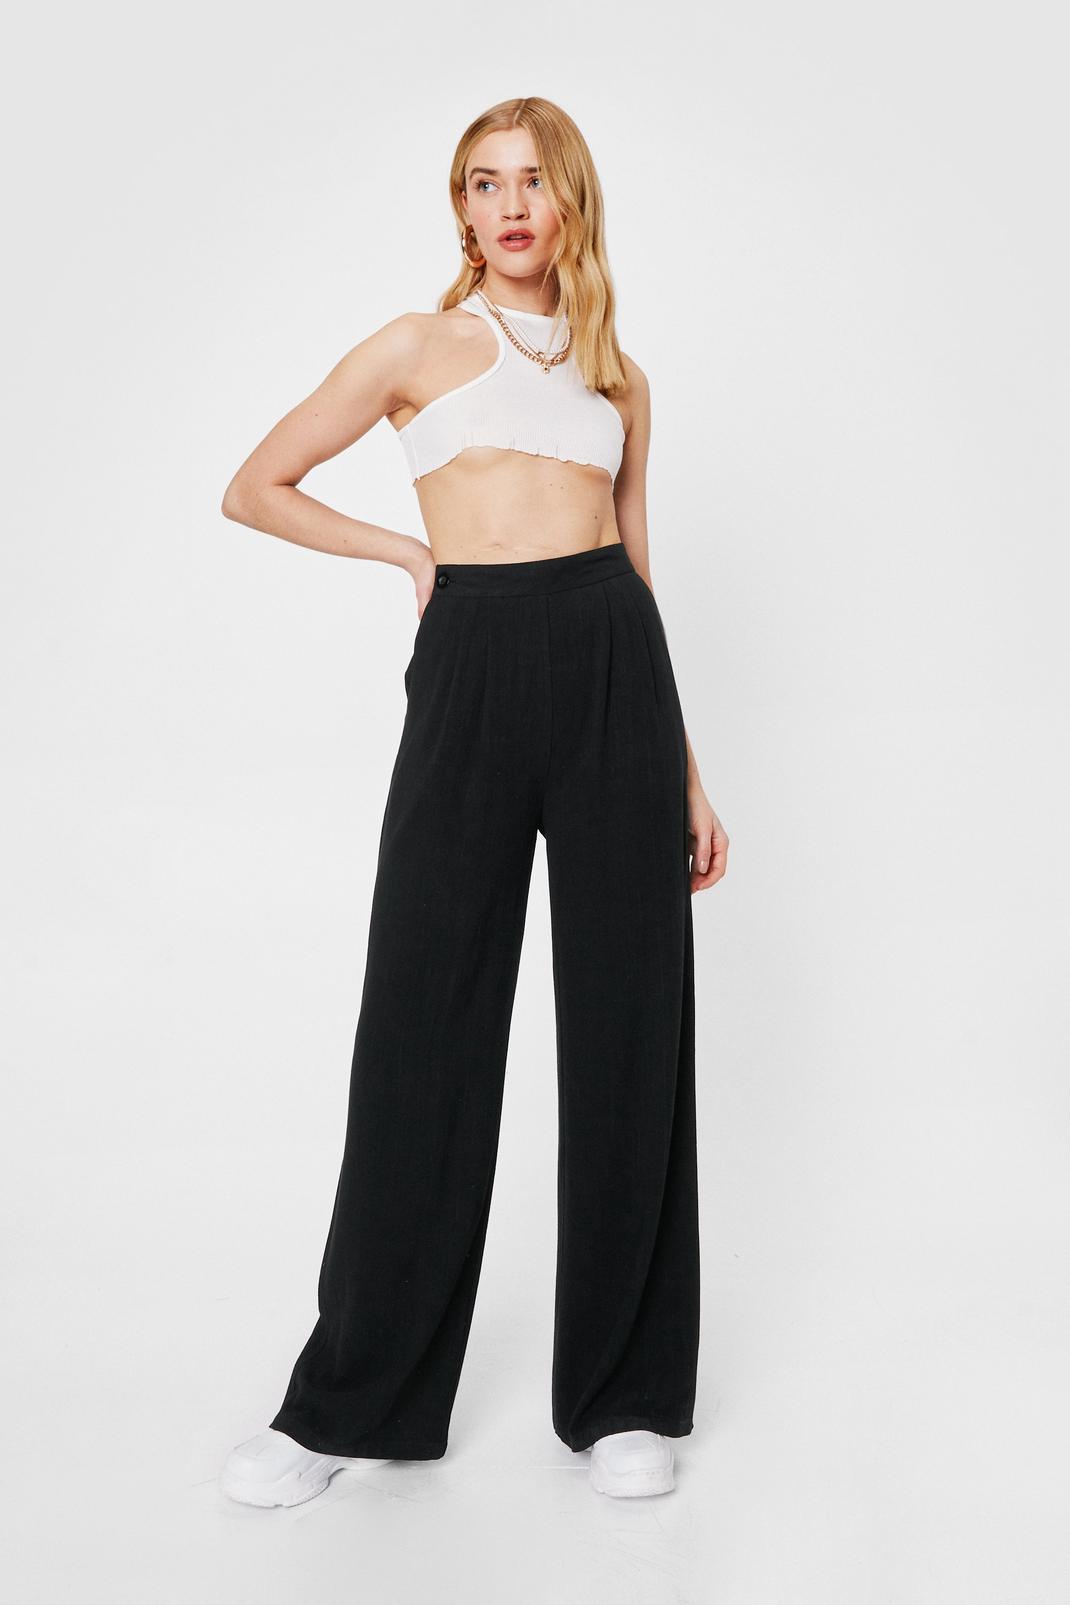 Remain High Waist Linen and Cotton CAMINO Double Pleated Pants